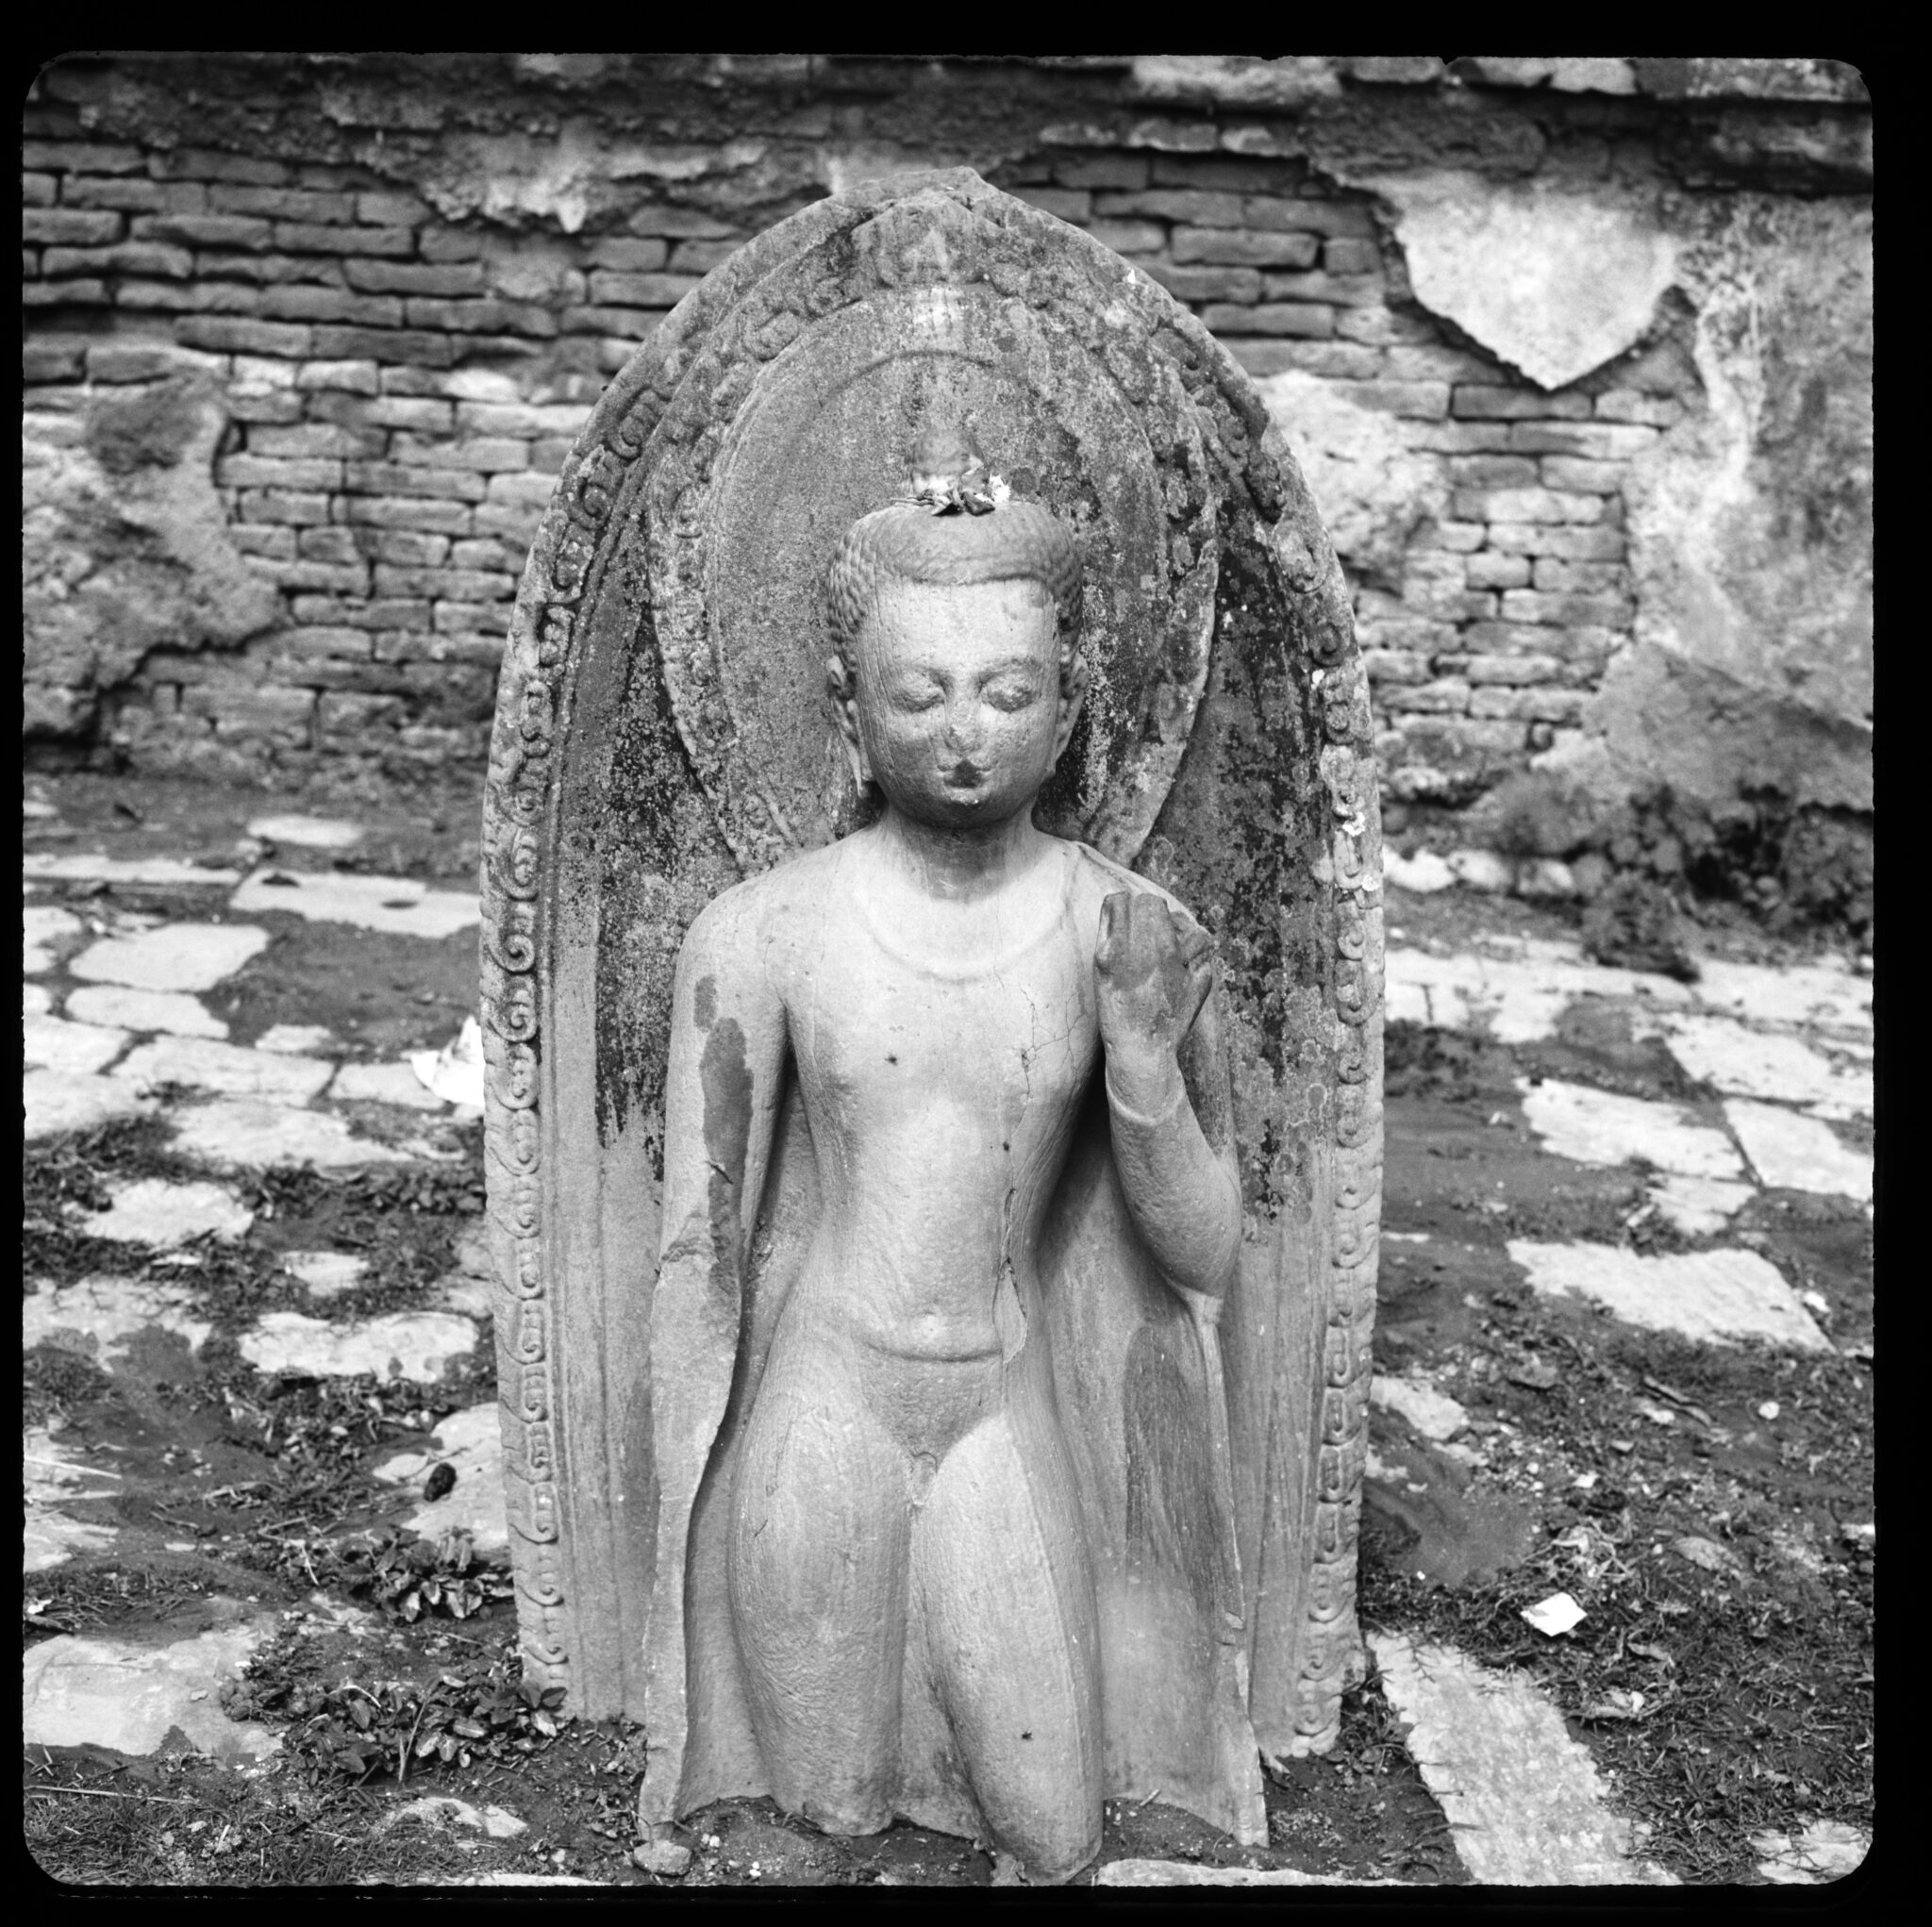 Black and white photograph of sculpture depicting Buddha standing in contrapposto; legs below knees are lost